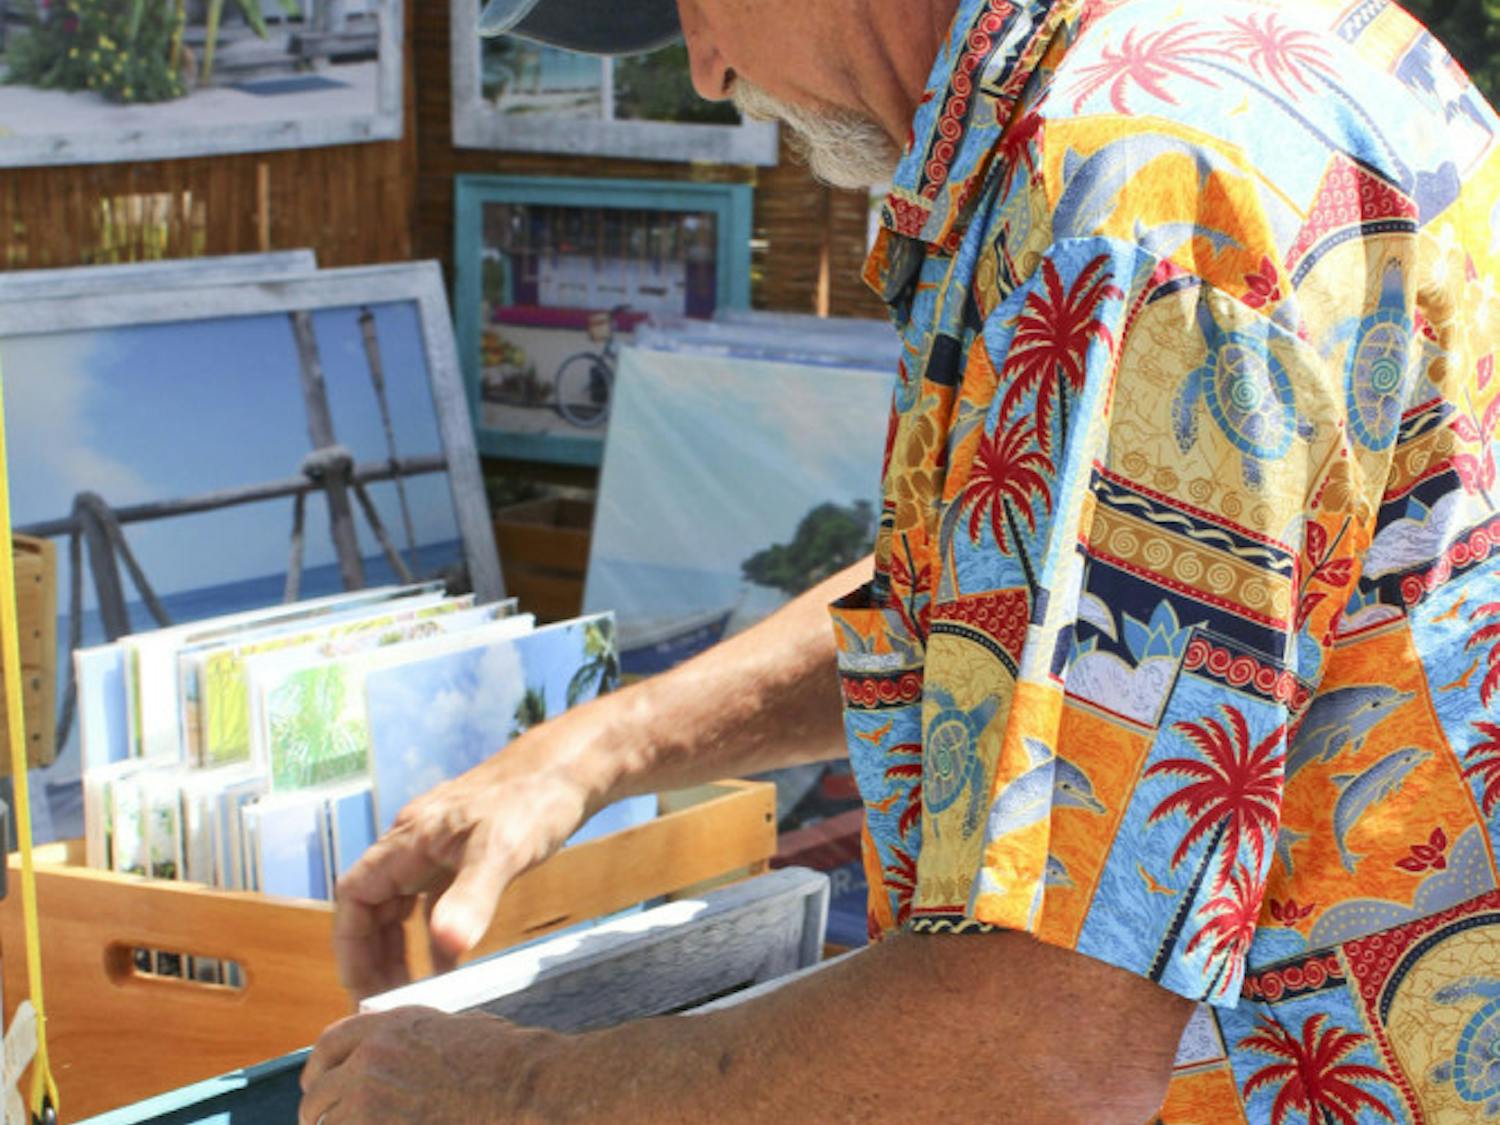 Ft. Pierce, Florida-based photographer Bill Dirienzo thumbs through picture frames on Sunday at the Santa Fe Spring Arts Festival in downtown Gainesville. Dirienzo has shot island photography for 10 years.